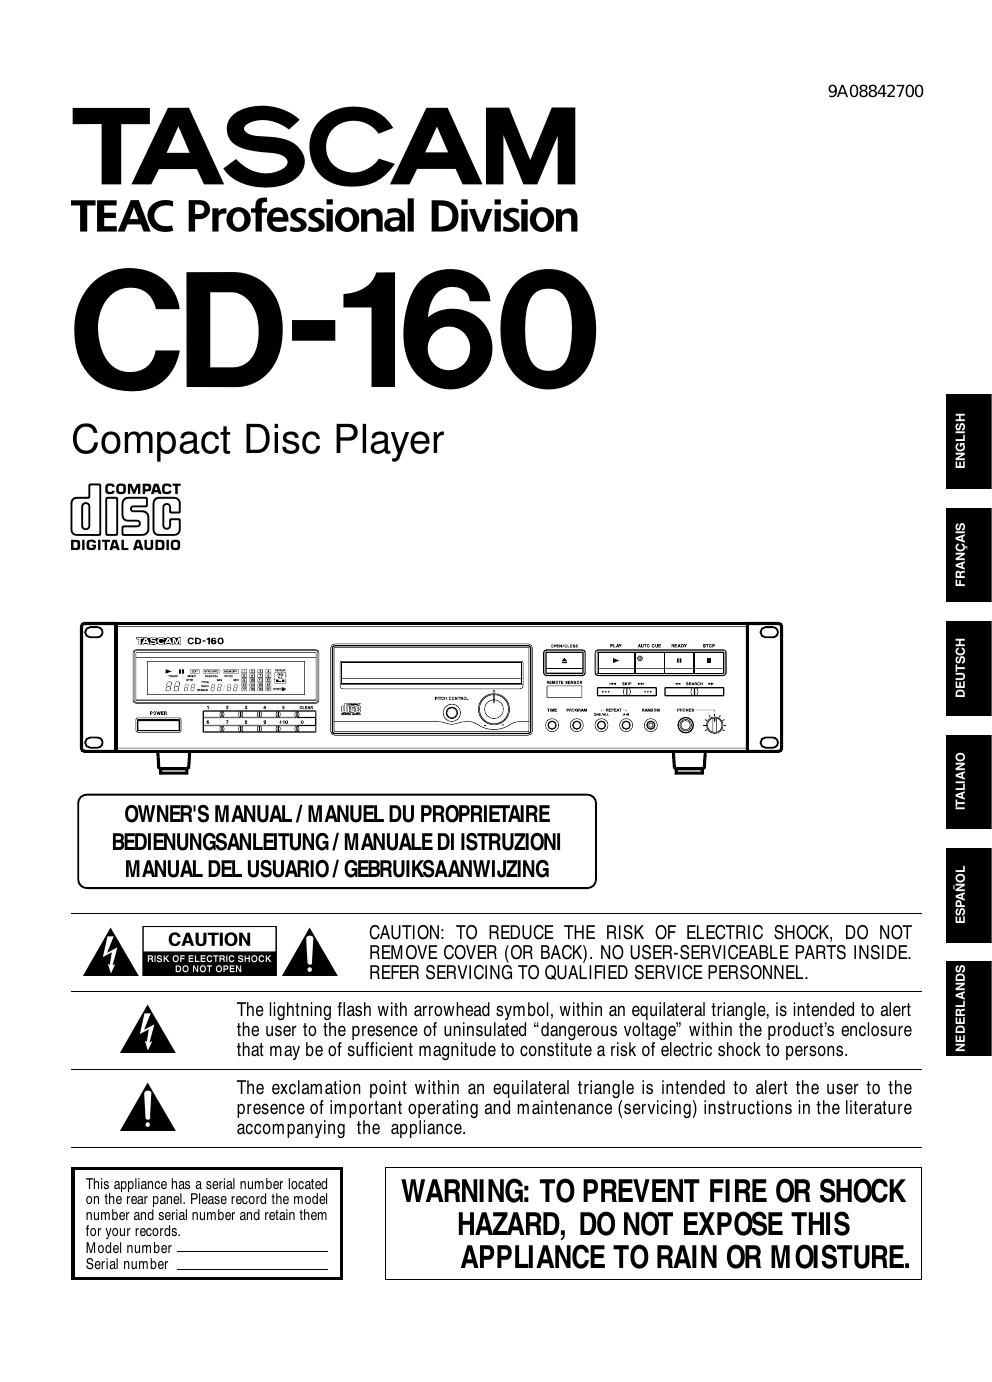 tascam cd 160 owners manual